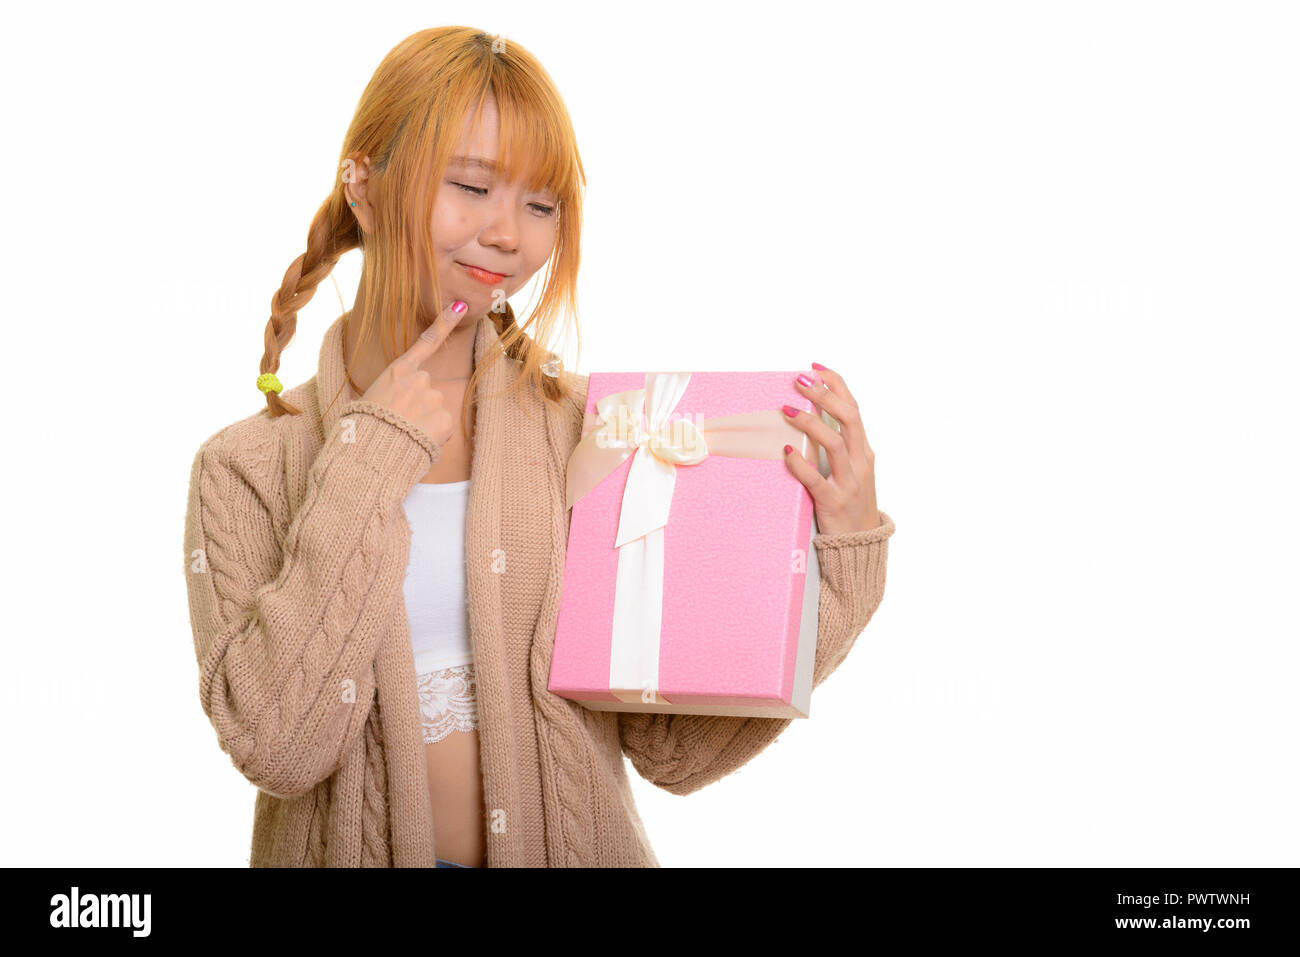 Young cute Asian woman holding gift box while thinking Stock Photo